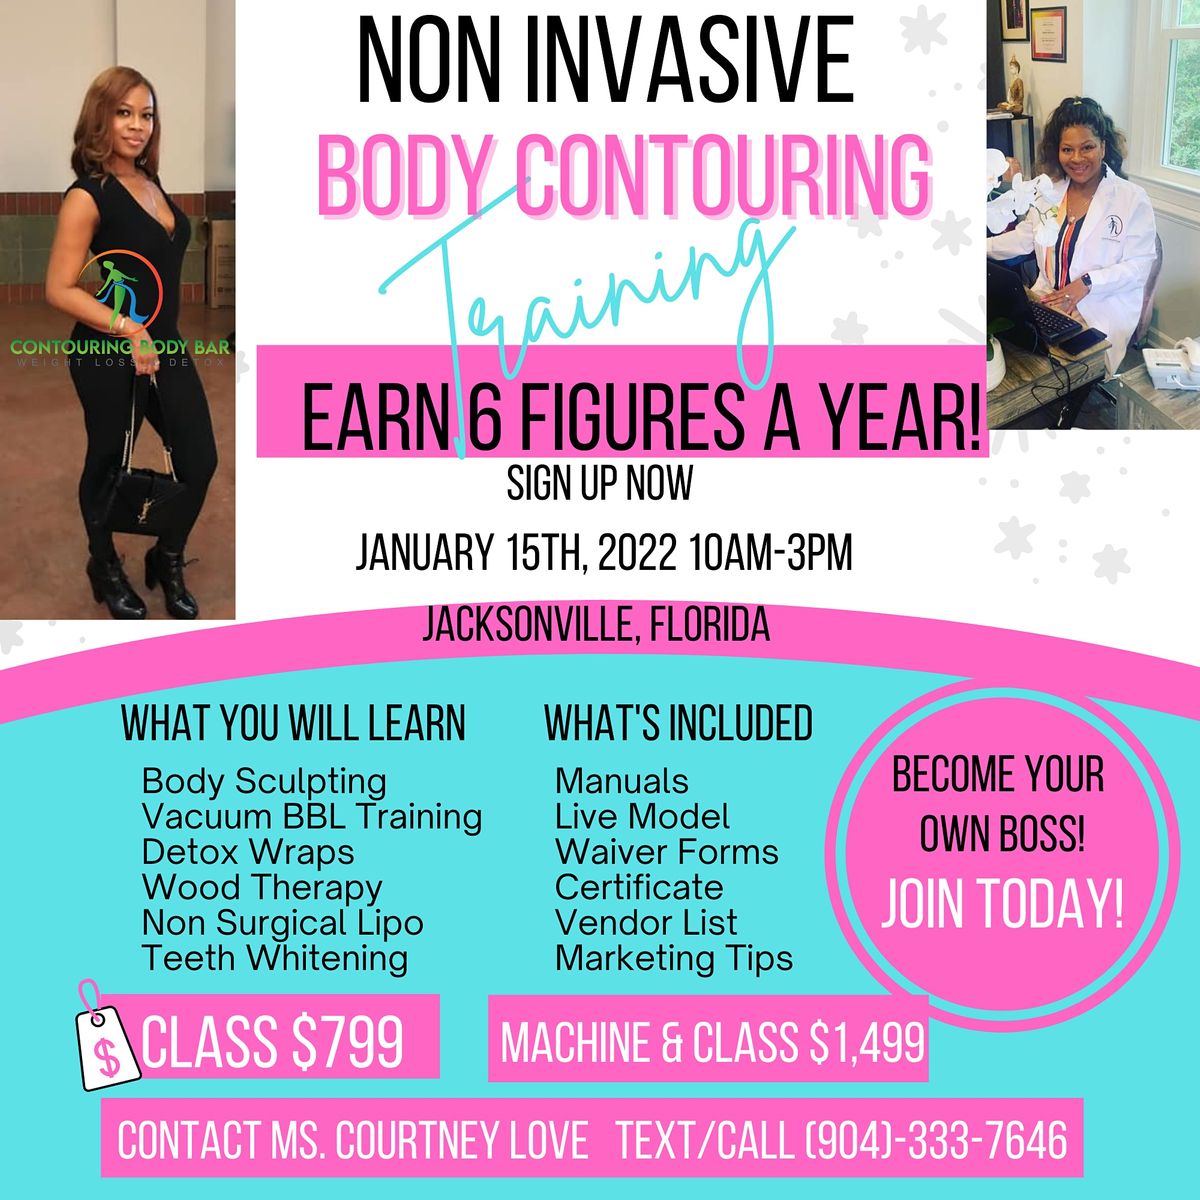 Master The Art of Body Contouring Training with Certification